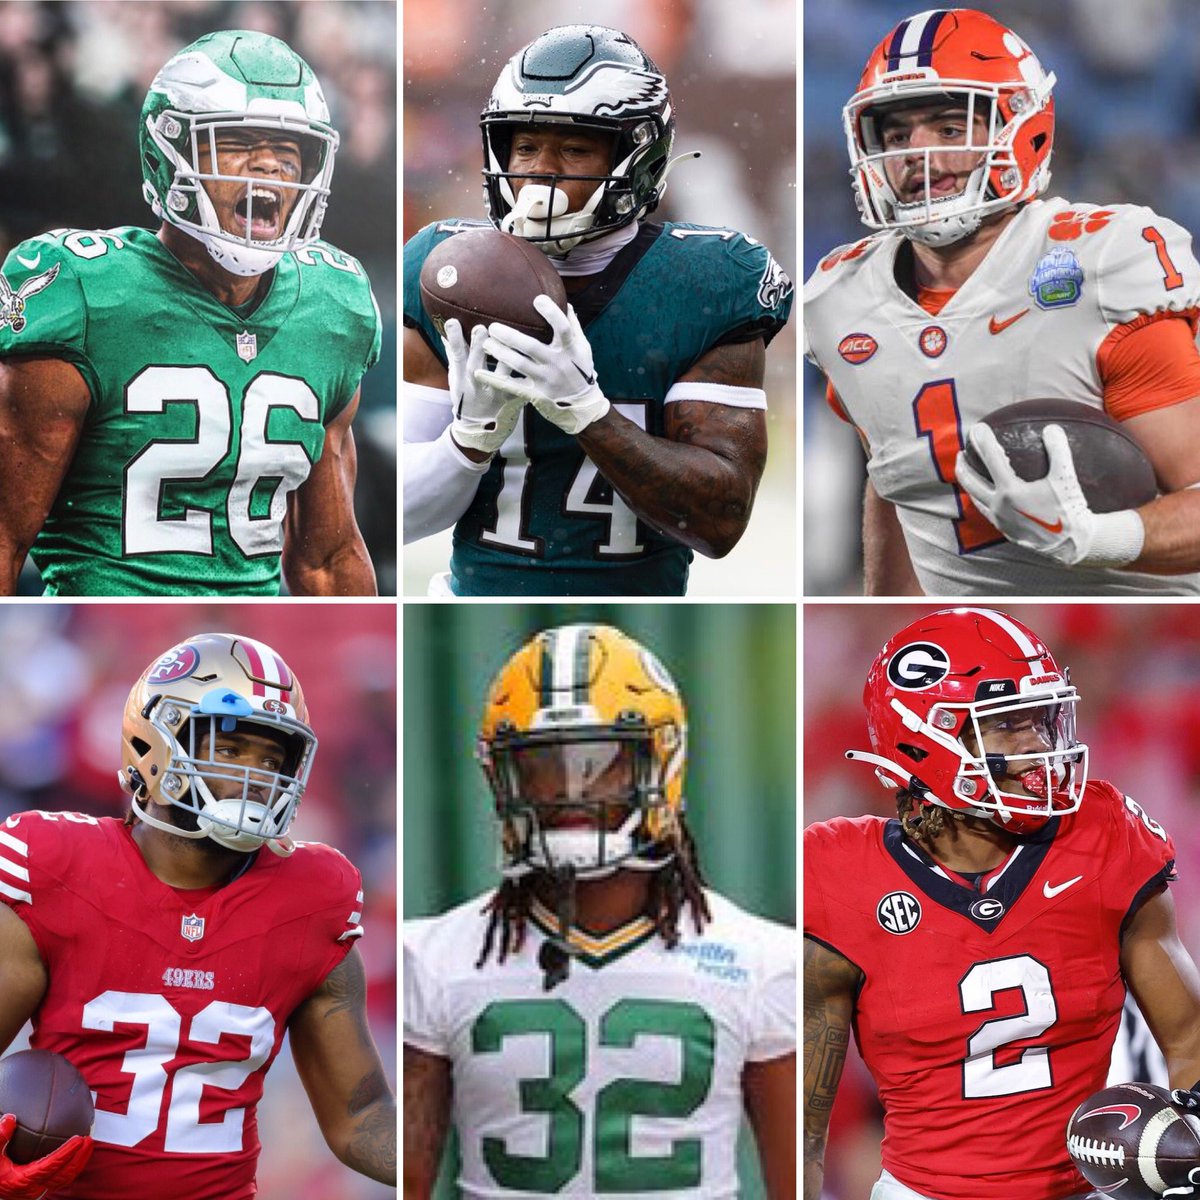 How do we feel about the #Eagles RB Room? • Saquon Barkley • Kenny Gainwell • Will Shipley • Ty Davis-Price • Lew Nichols III • Kendall Milton #FlyEaglesFly